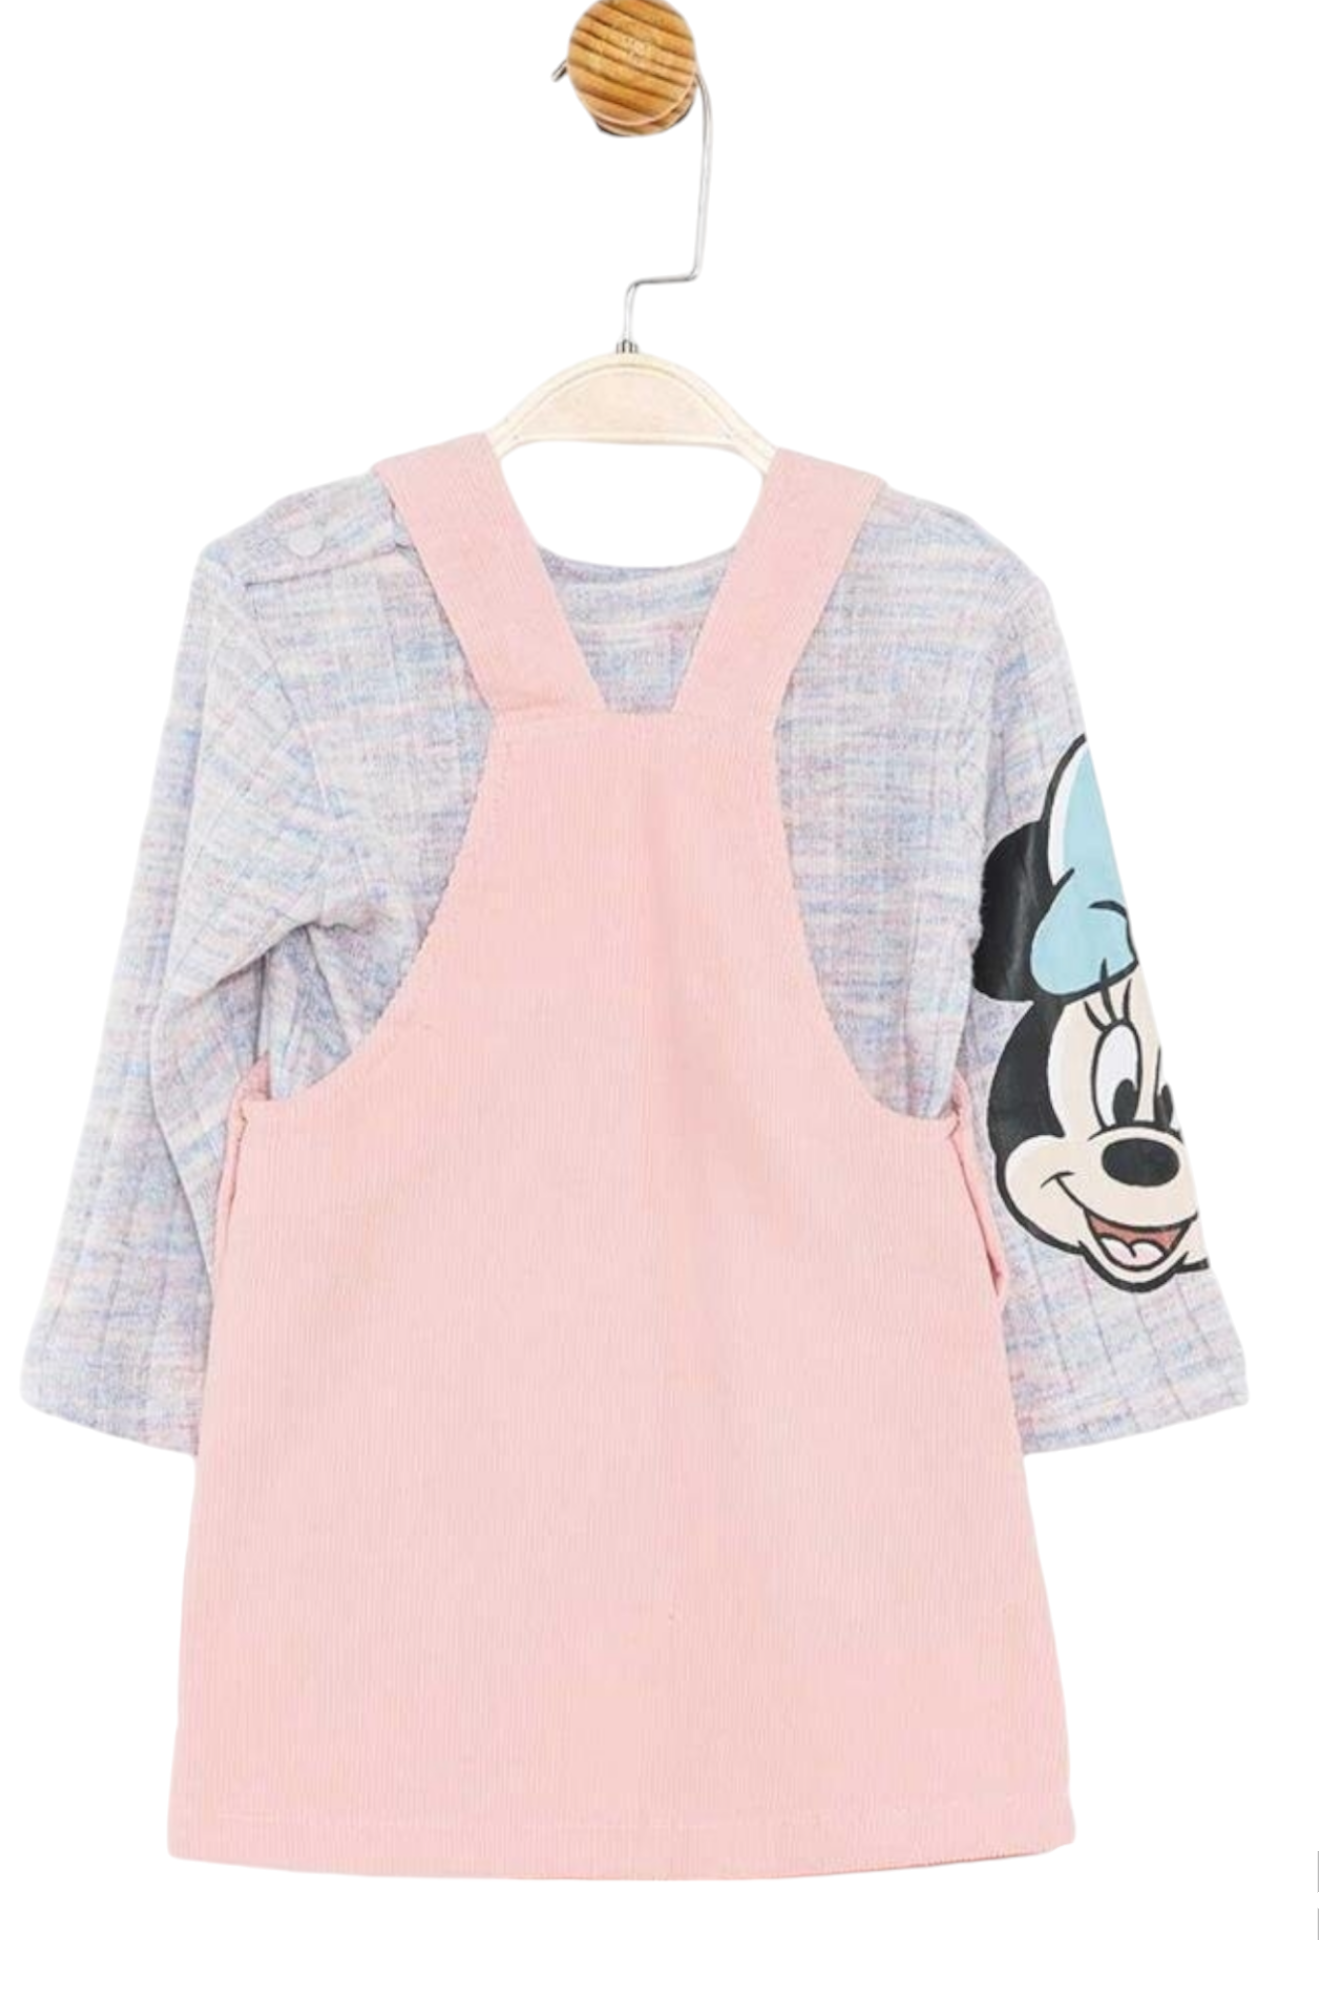 Minnie Mouse Baby Girl Dress